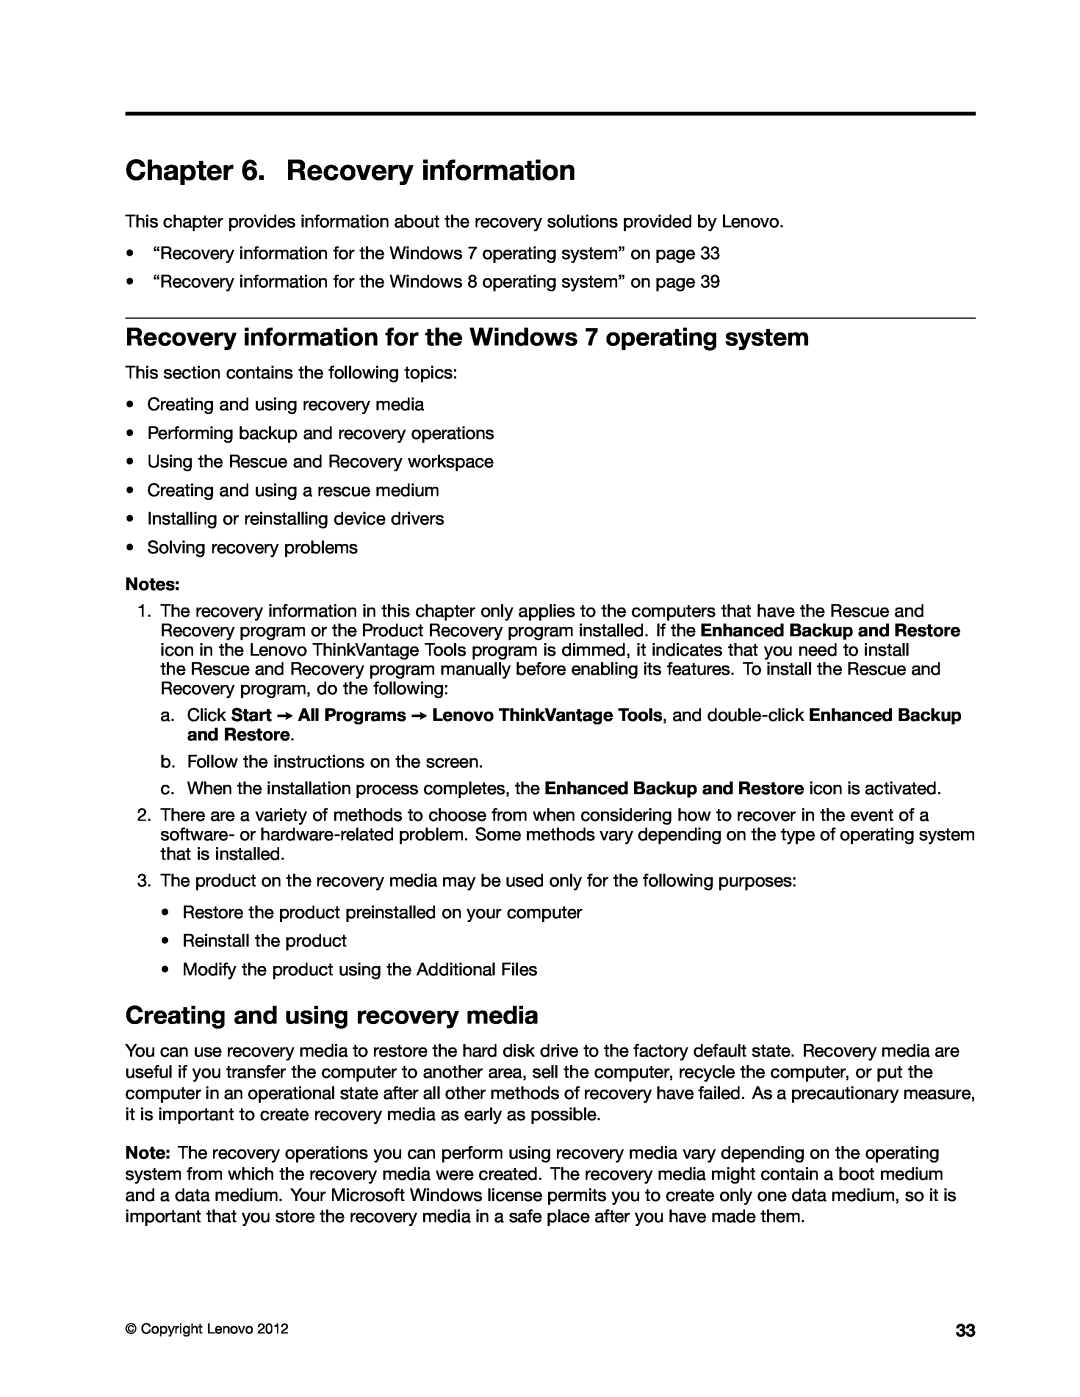 Lenovo 2117EKU manual Recovery information for the Windows 7 operating system, Creating and using recovery media 